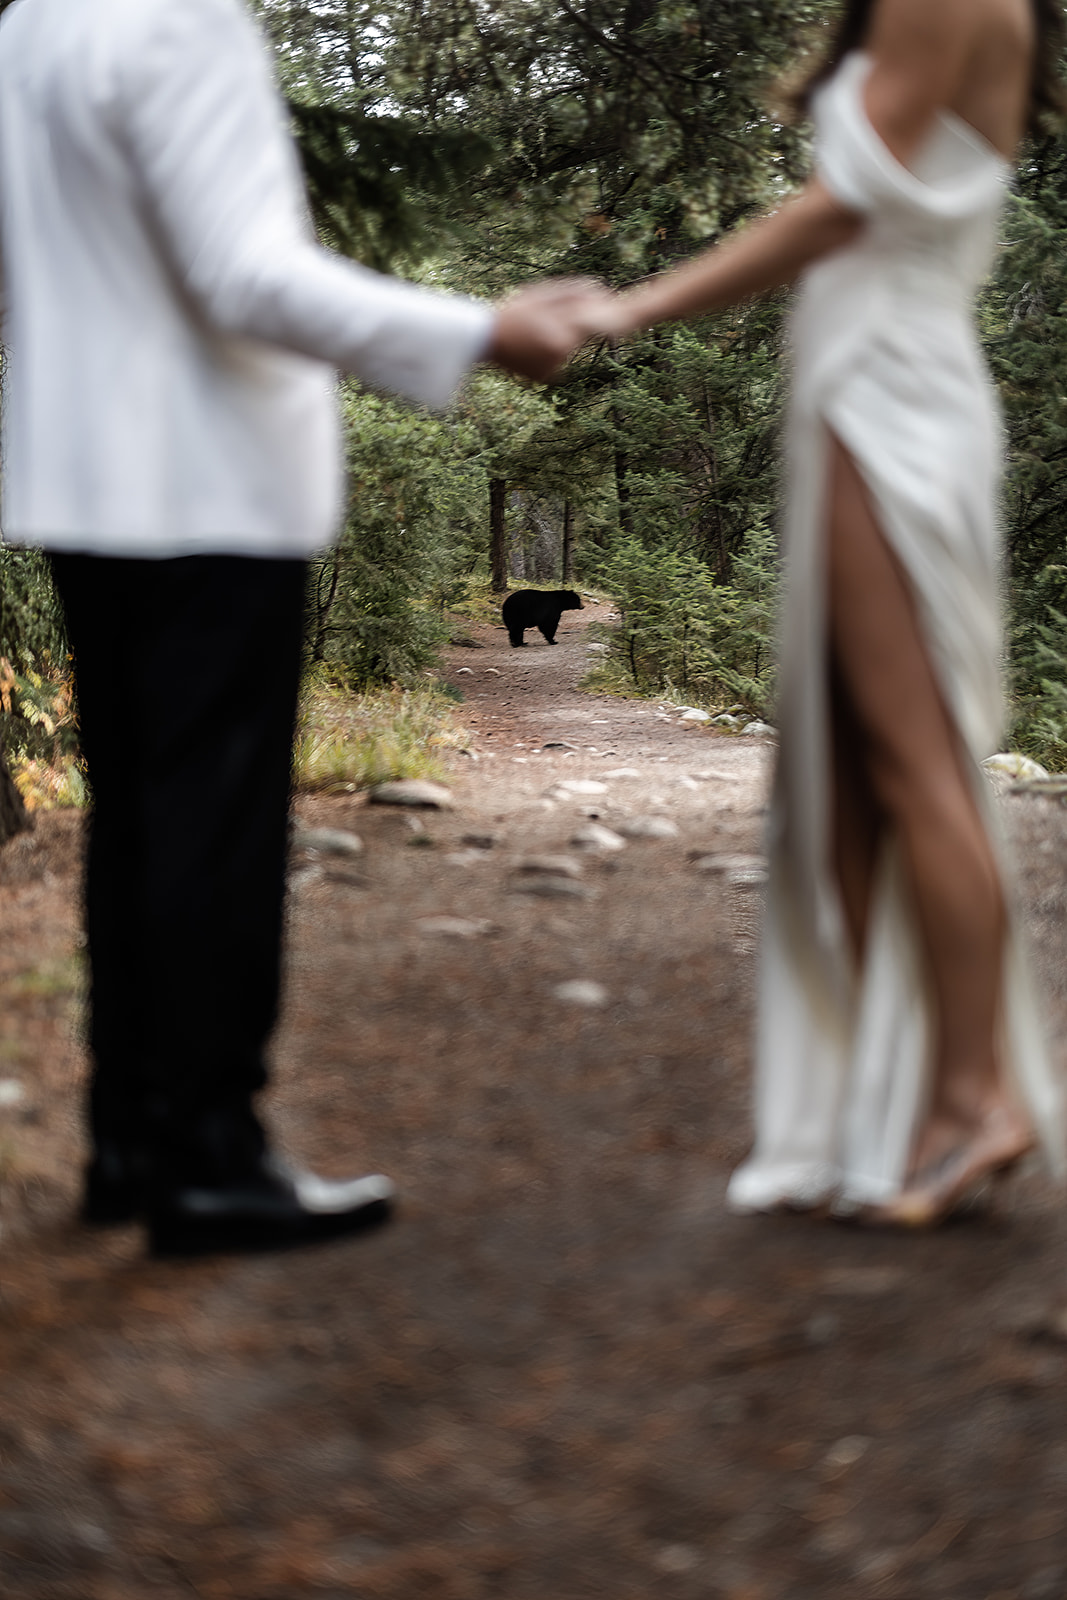 A couple poses with a black bear on their wedding day at the Fairmont Jasper Park Lodge